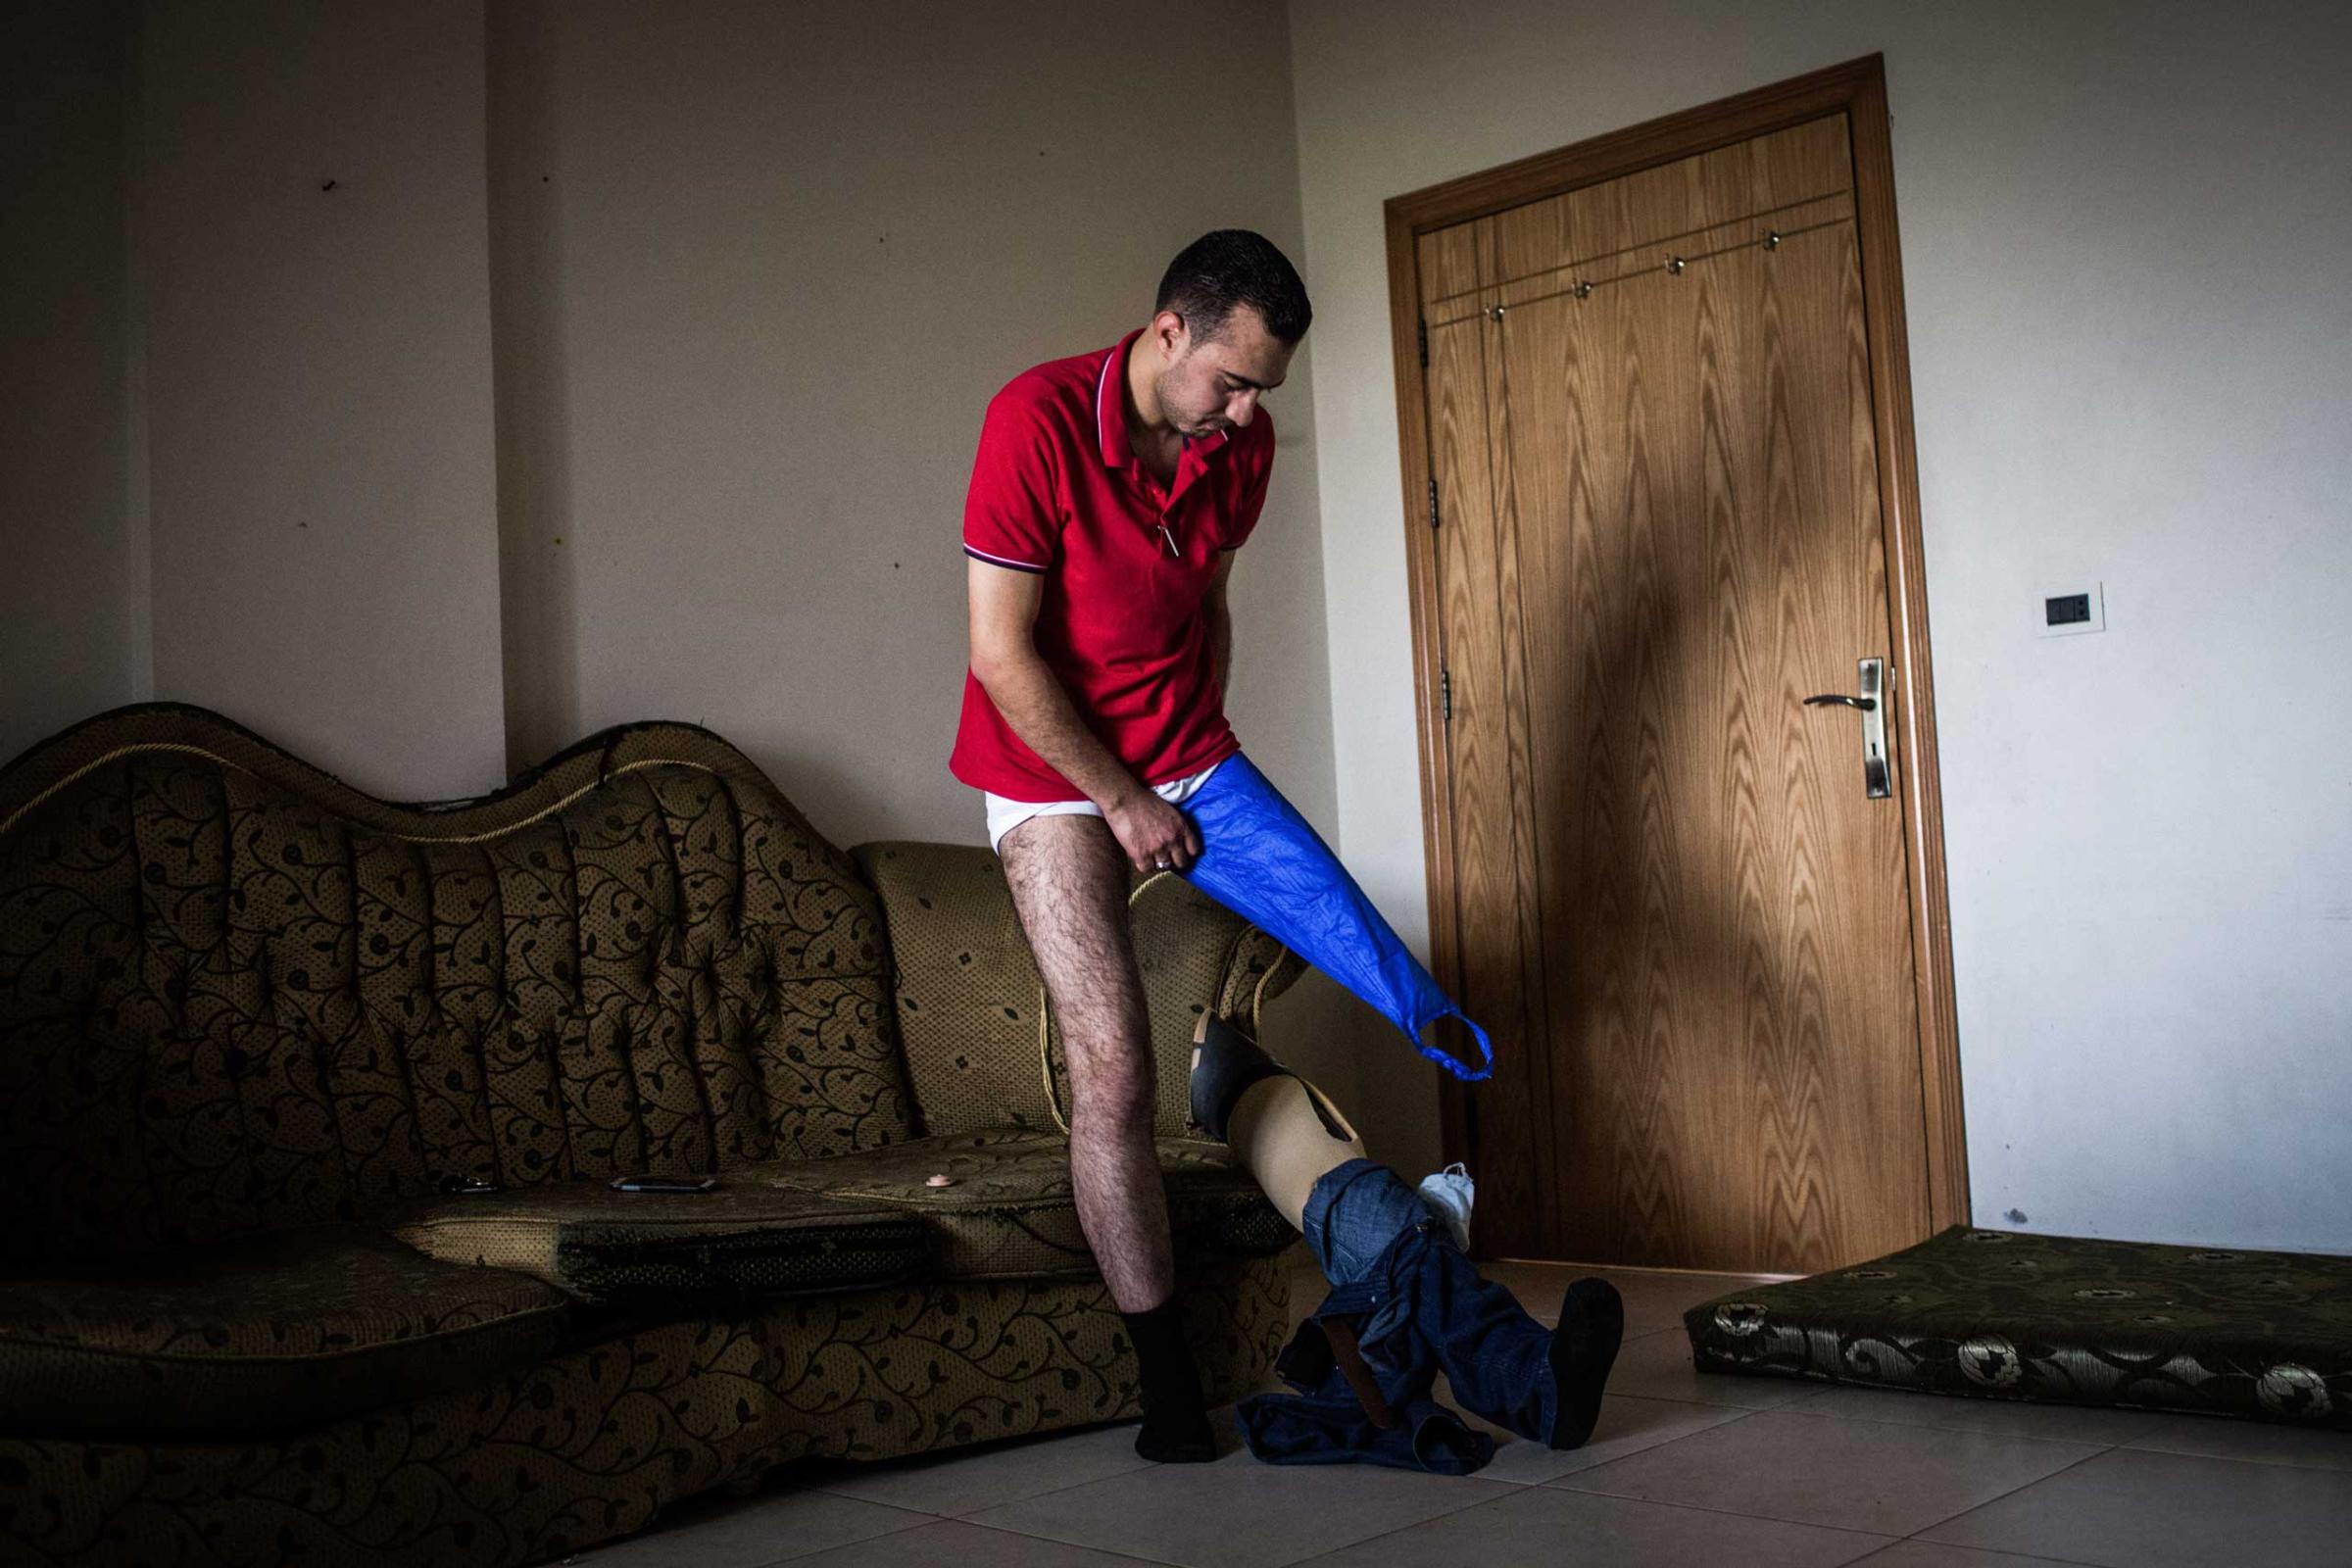 Ihsan fits his prosthetic at home in Qab Elias, Lebanon, June 19, 2014. The dental student, 22, was injured in December 2012 when a bomb fell nearby, leading to two surgeries and the loss of a leg. He continued to volunteer.